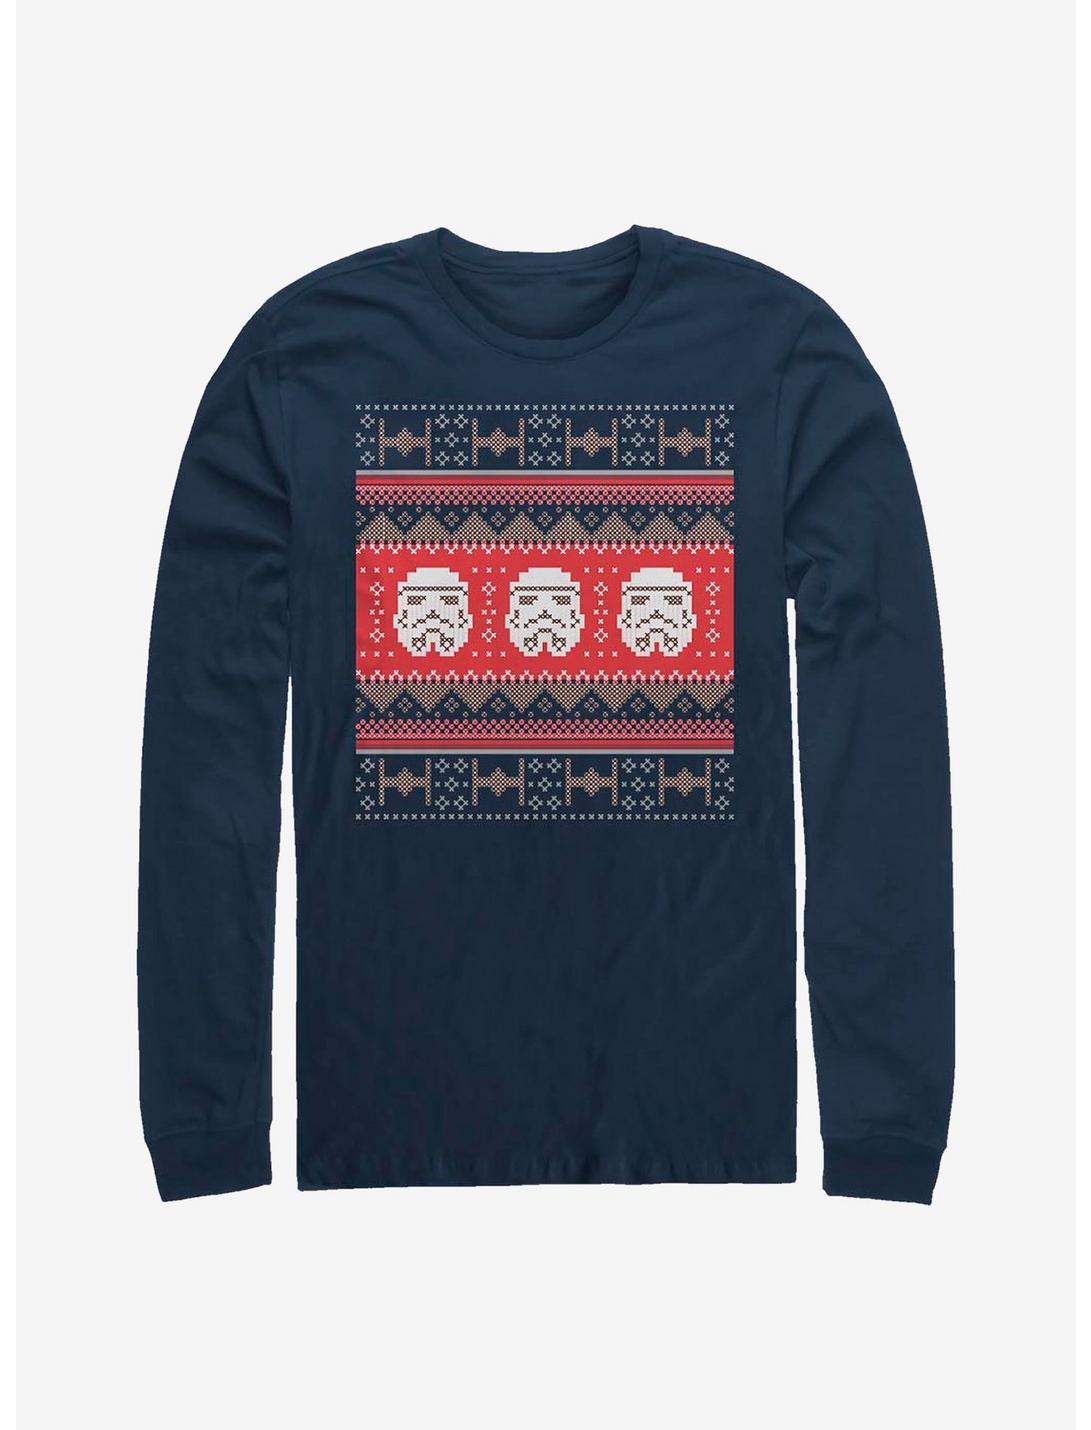 Star Wars Trooper Stitches Long-Sleeve T-Shirt, NAVY, hi-res